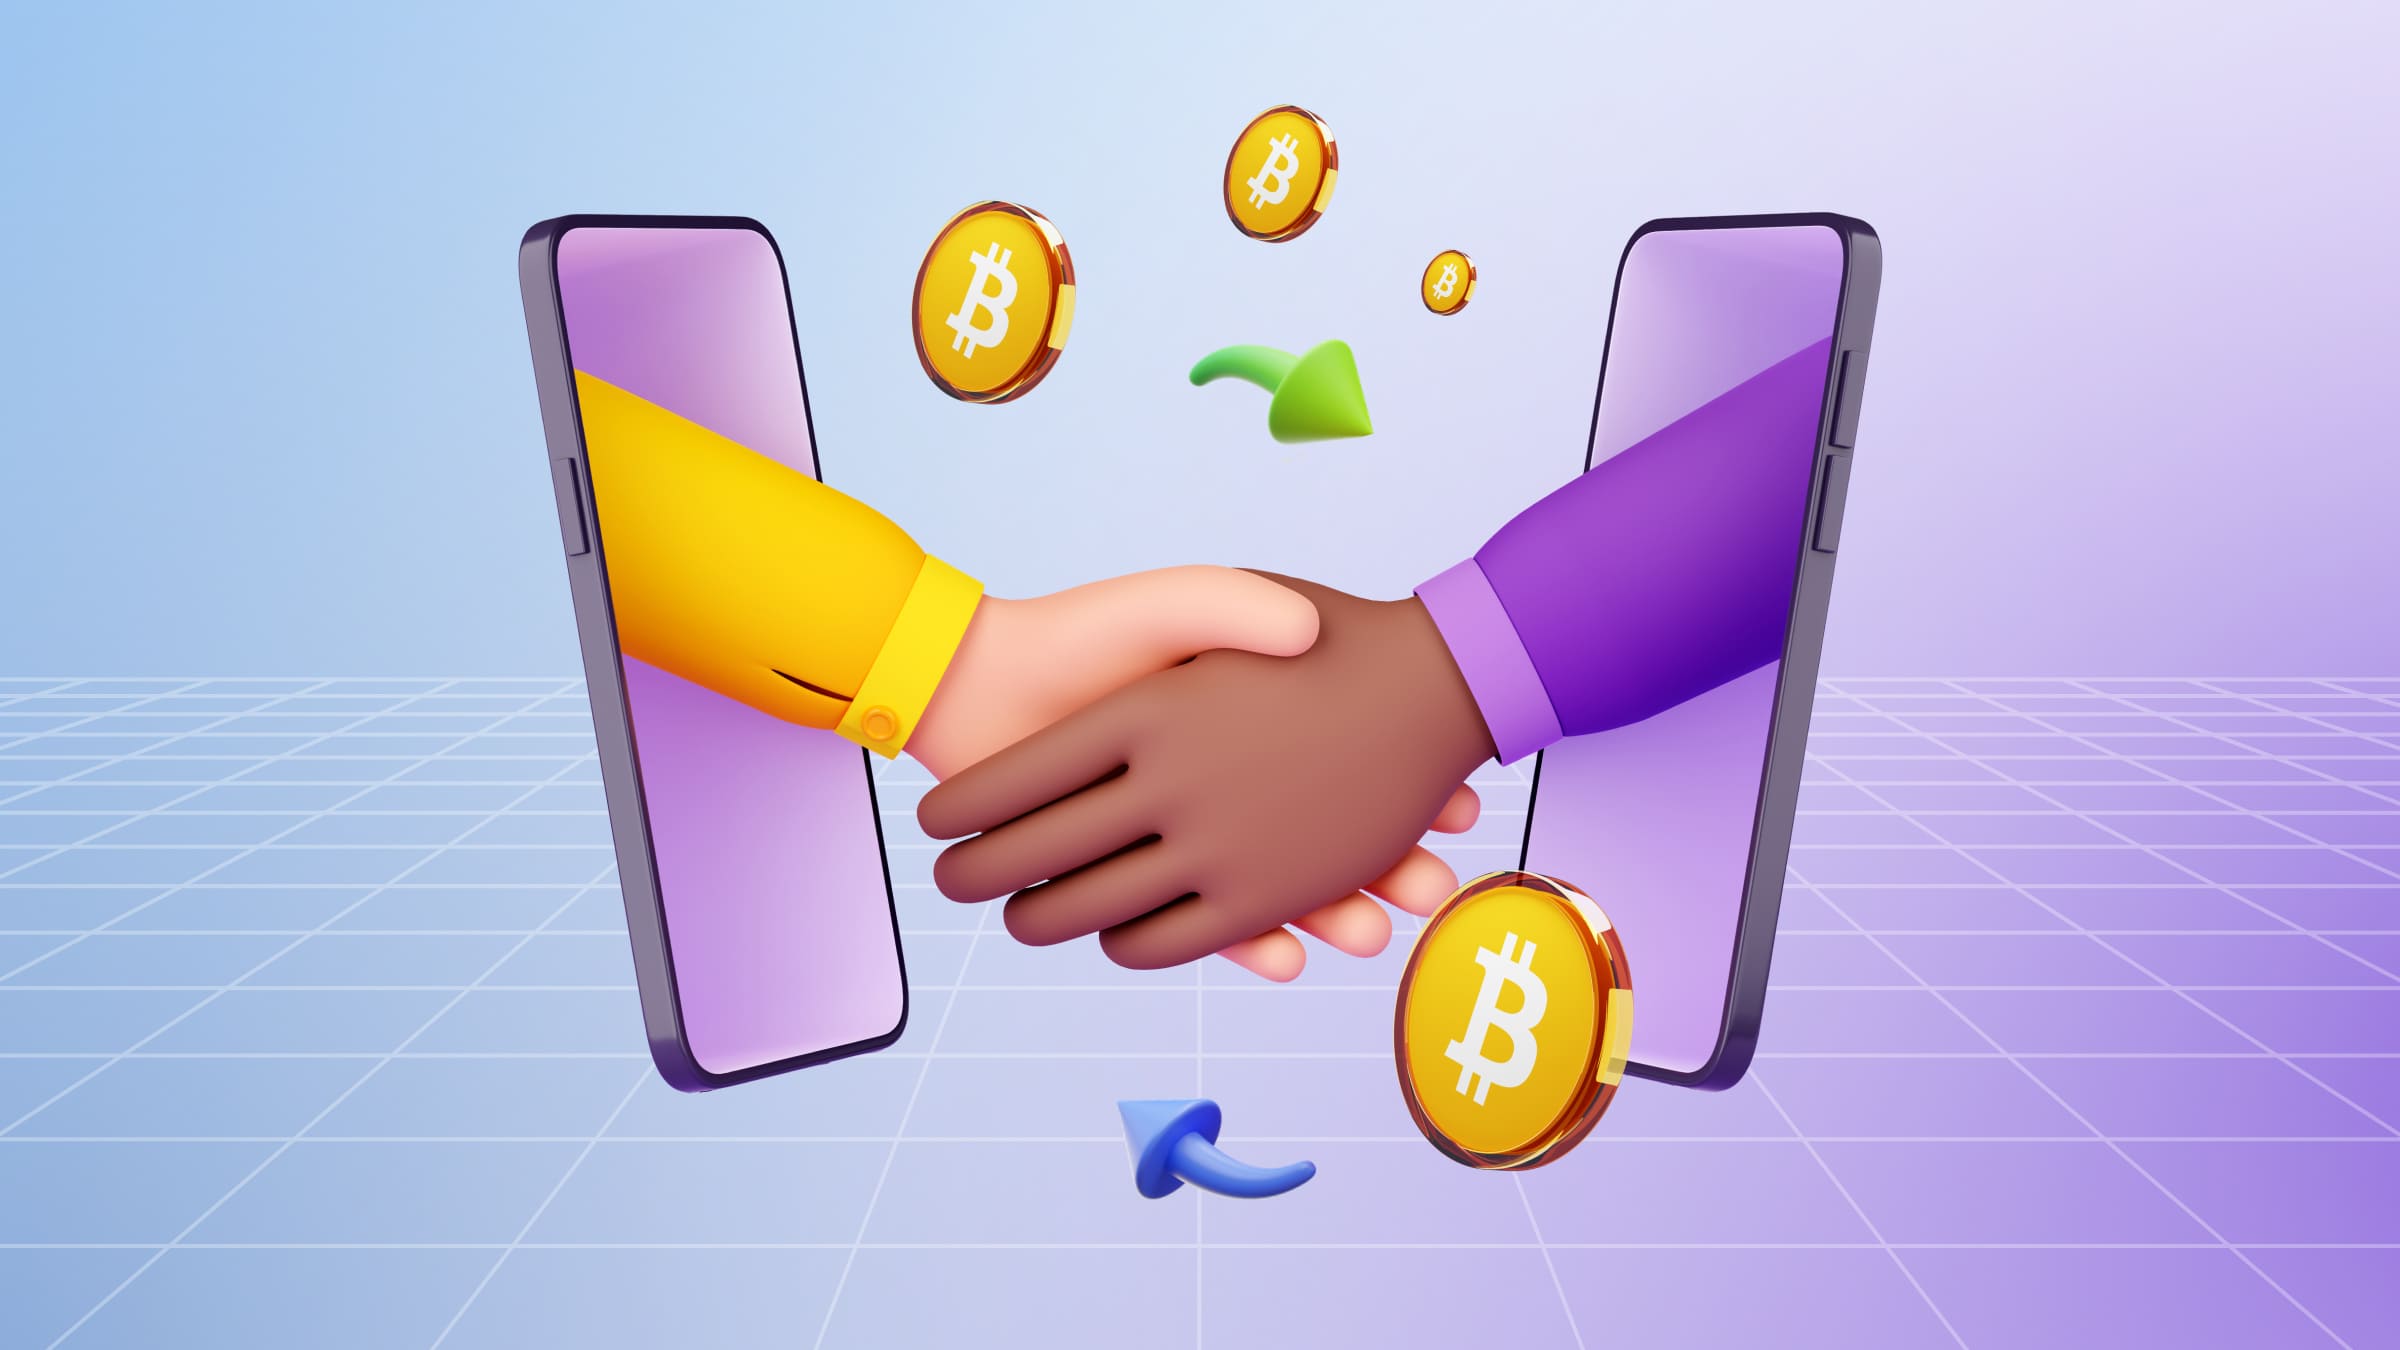 Connecting popular payment services helps build trust with potential buyers.